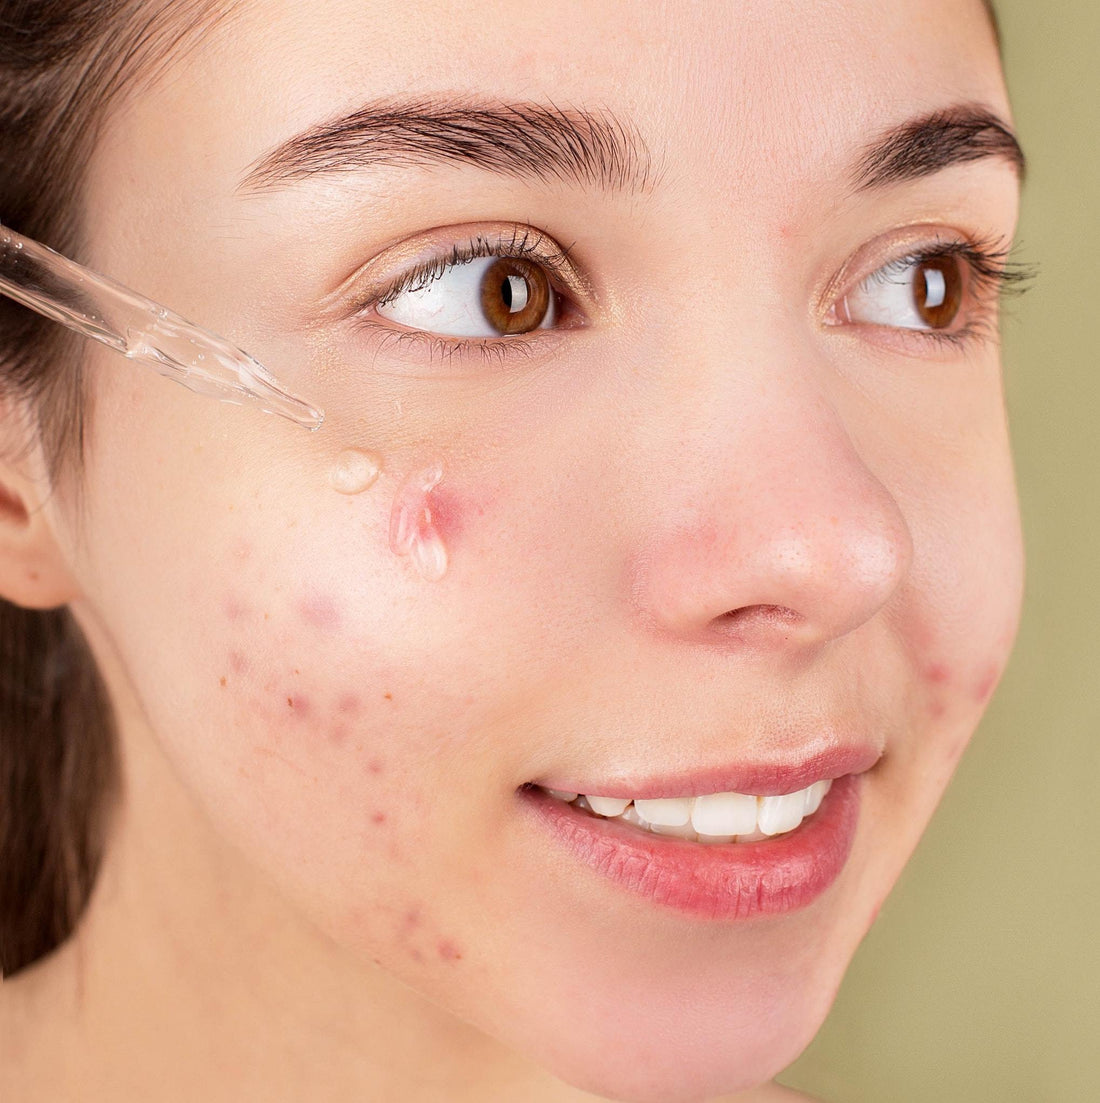 Acne Scars: Can They Be Removed? | Kiss Selfcare